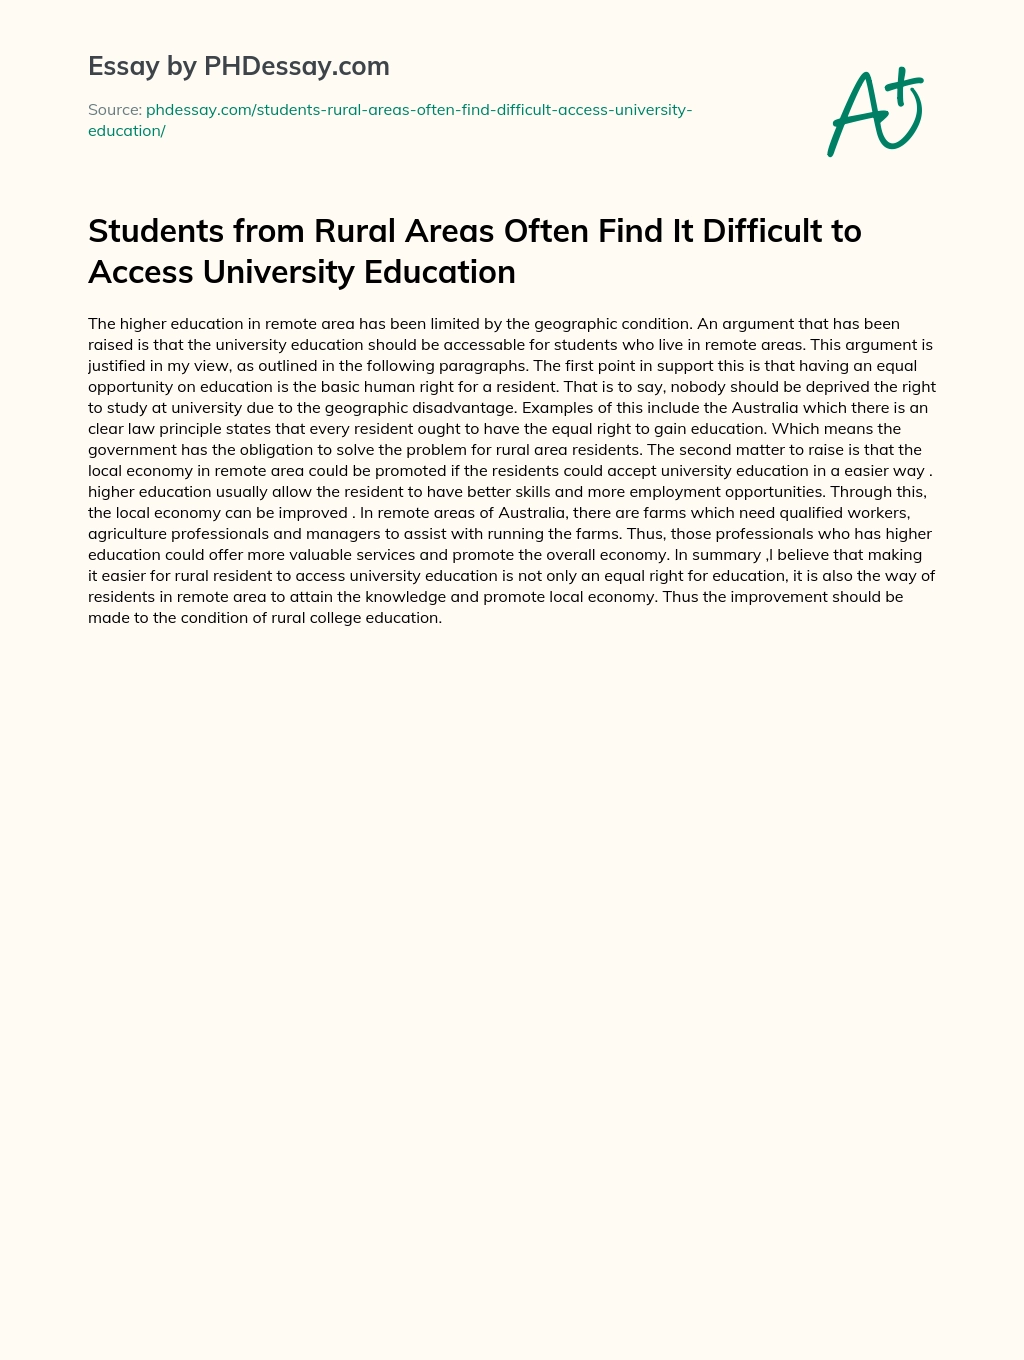 Students from Rural Areas Often Find It Difficult to Access University Education essay